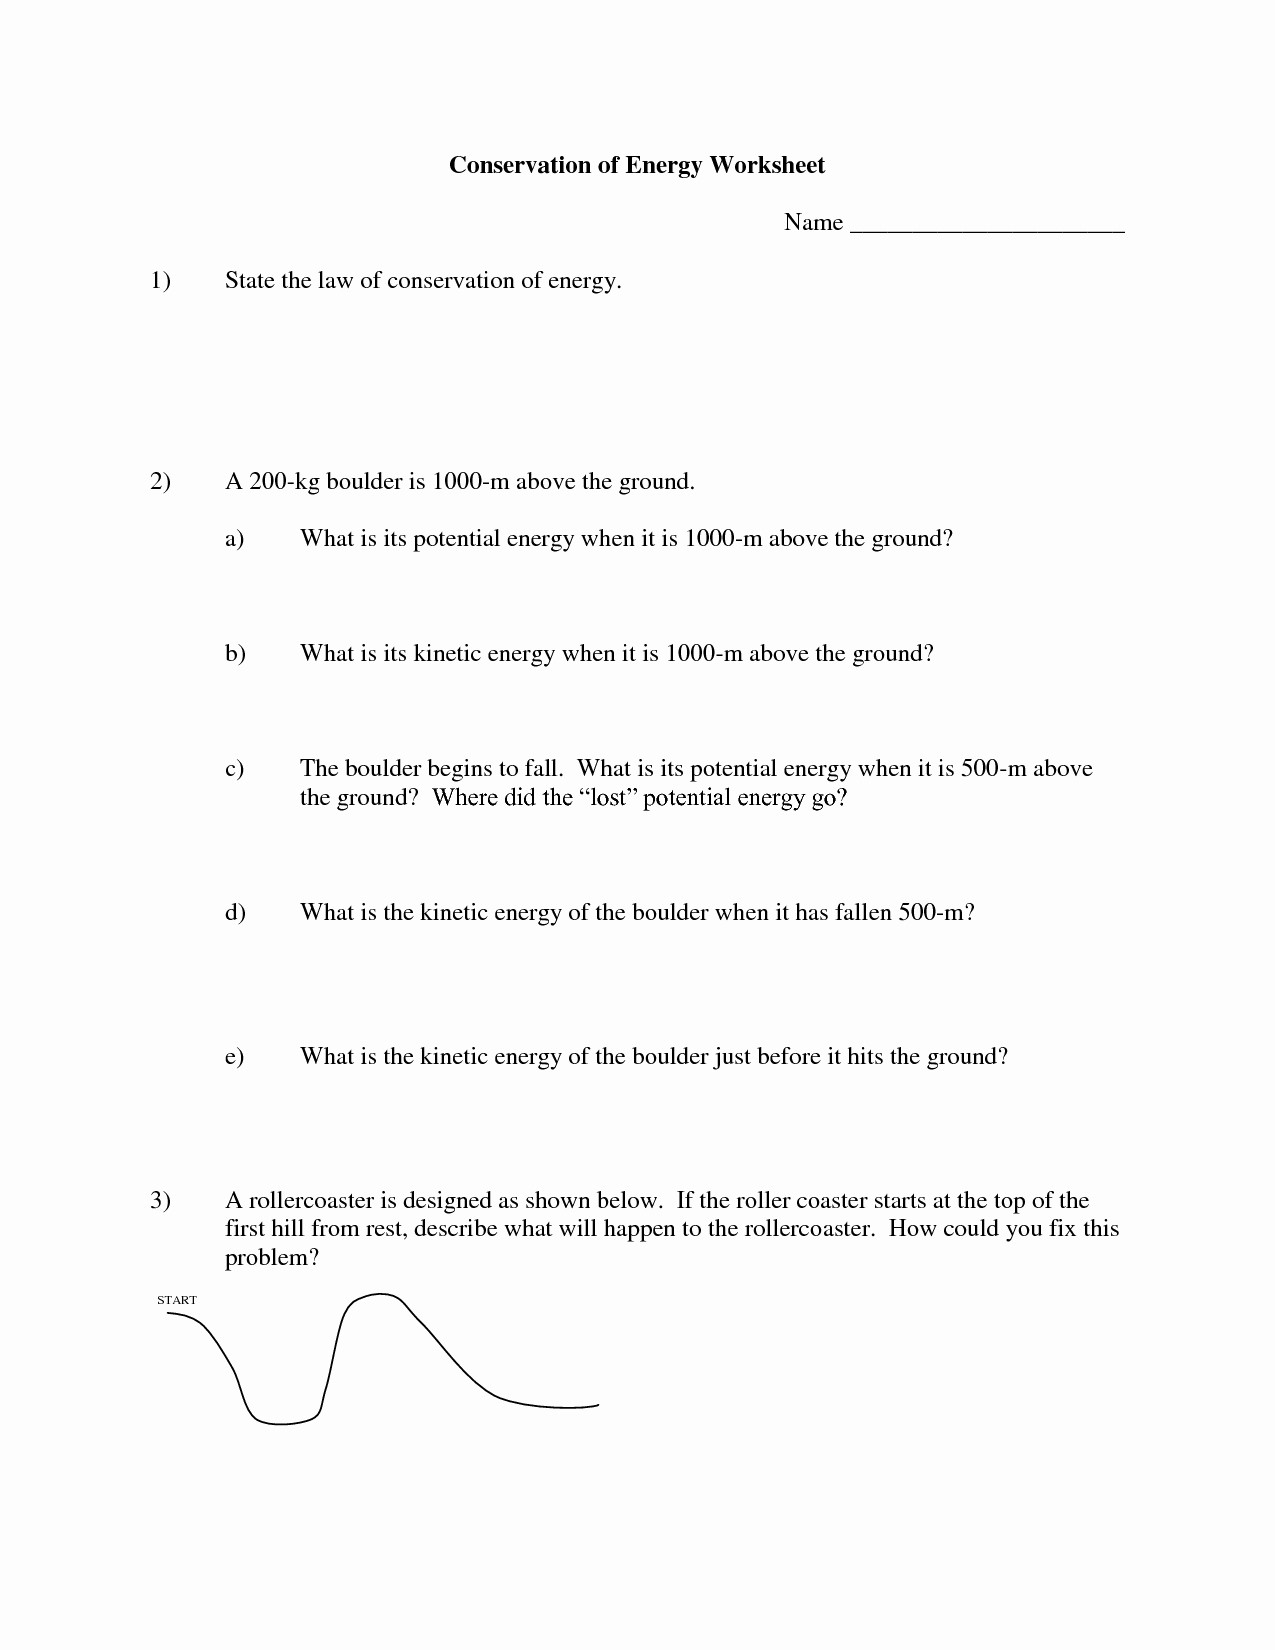 Conservation Of Energy Worksheet Answers Writting Transformation Worksheets